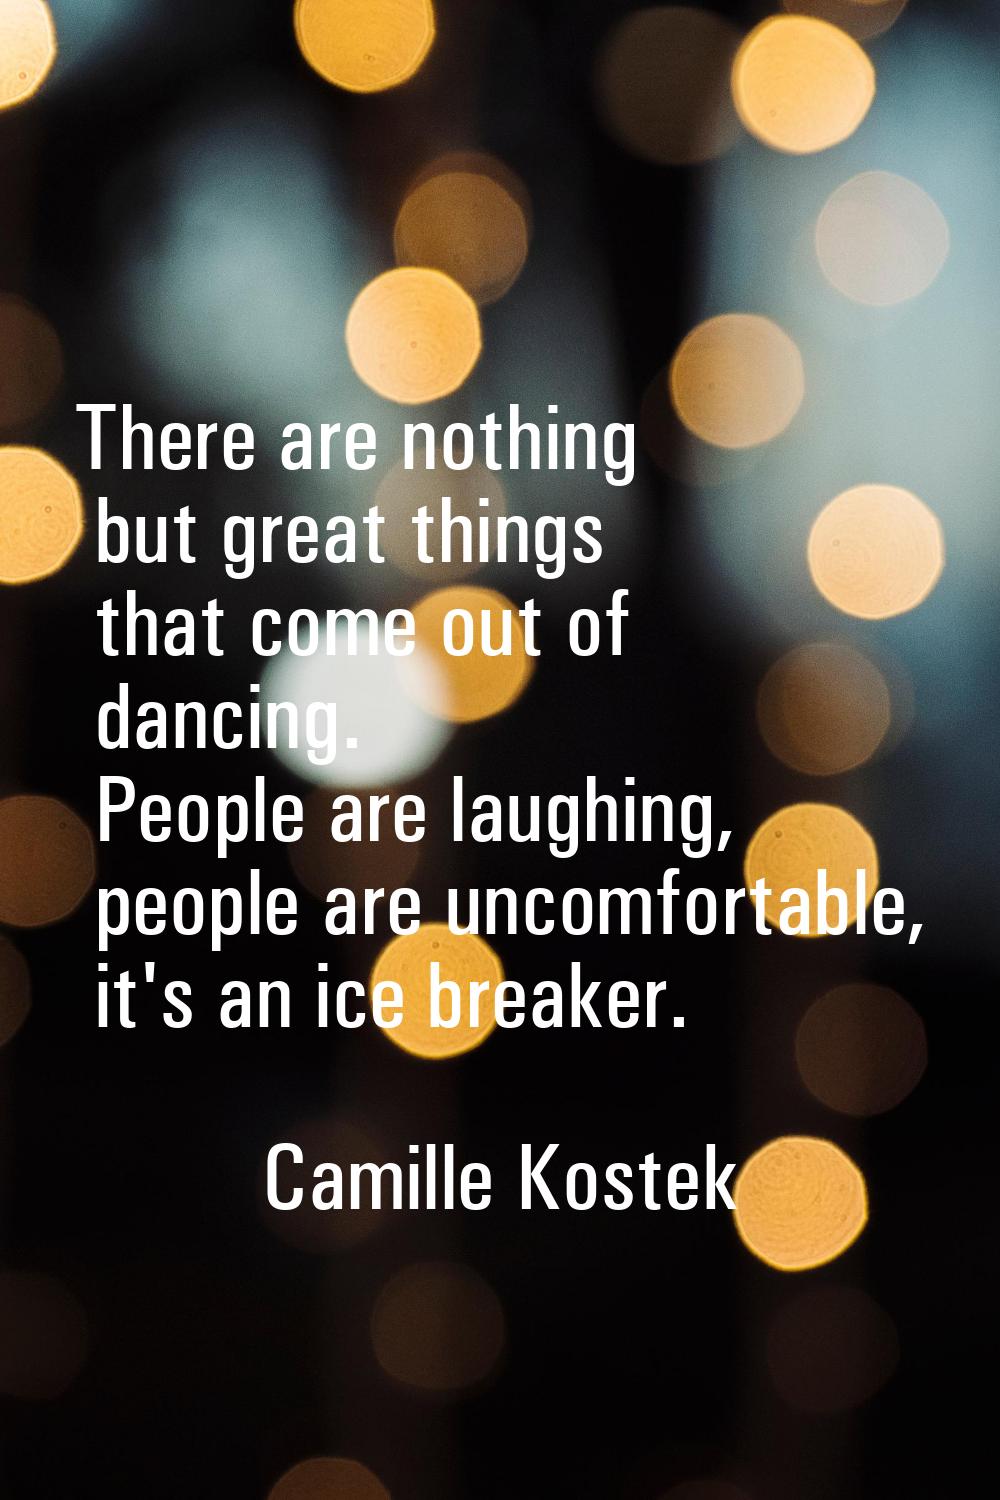 There are nothing but great things that come out of dancing. People are laughing, people are uncomf